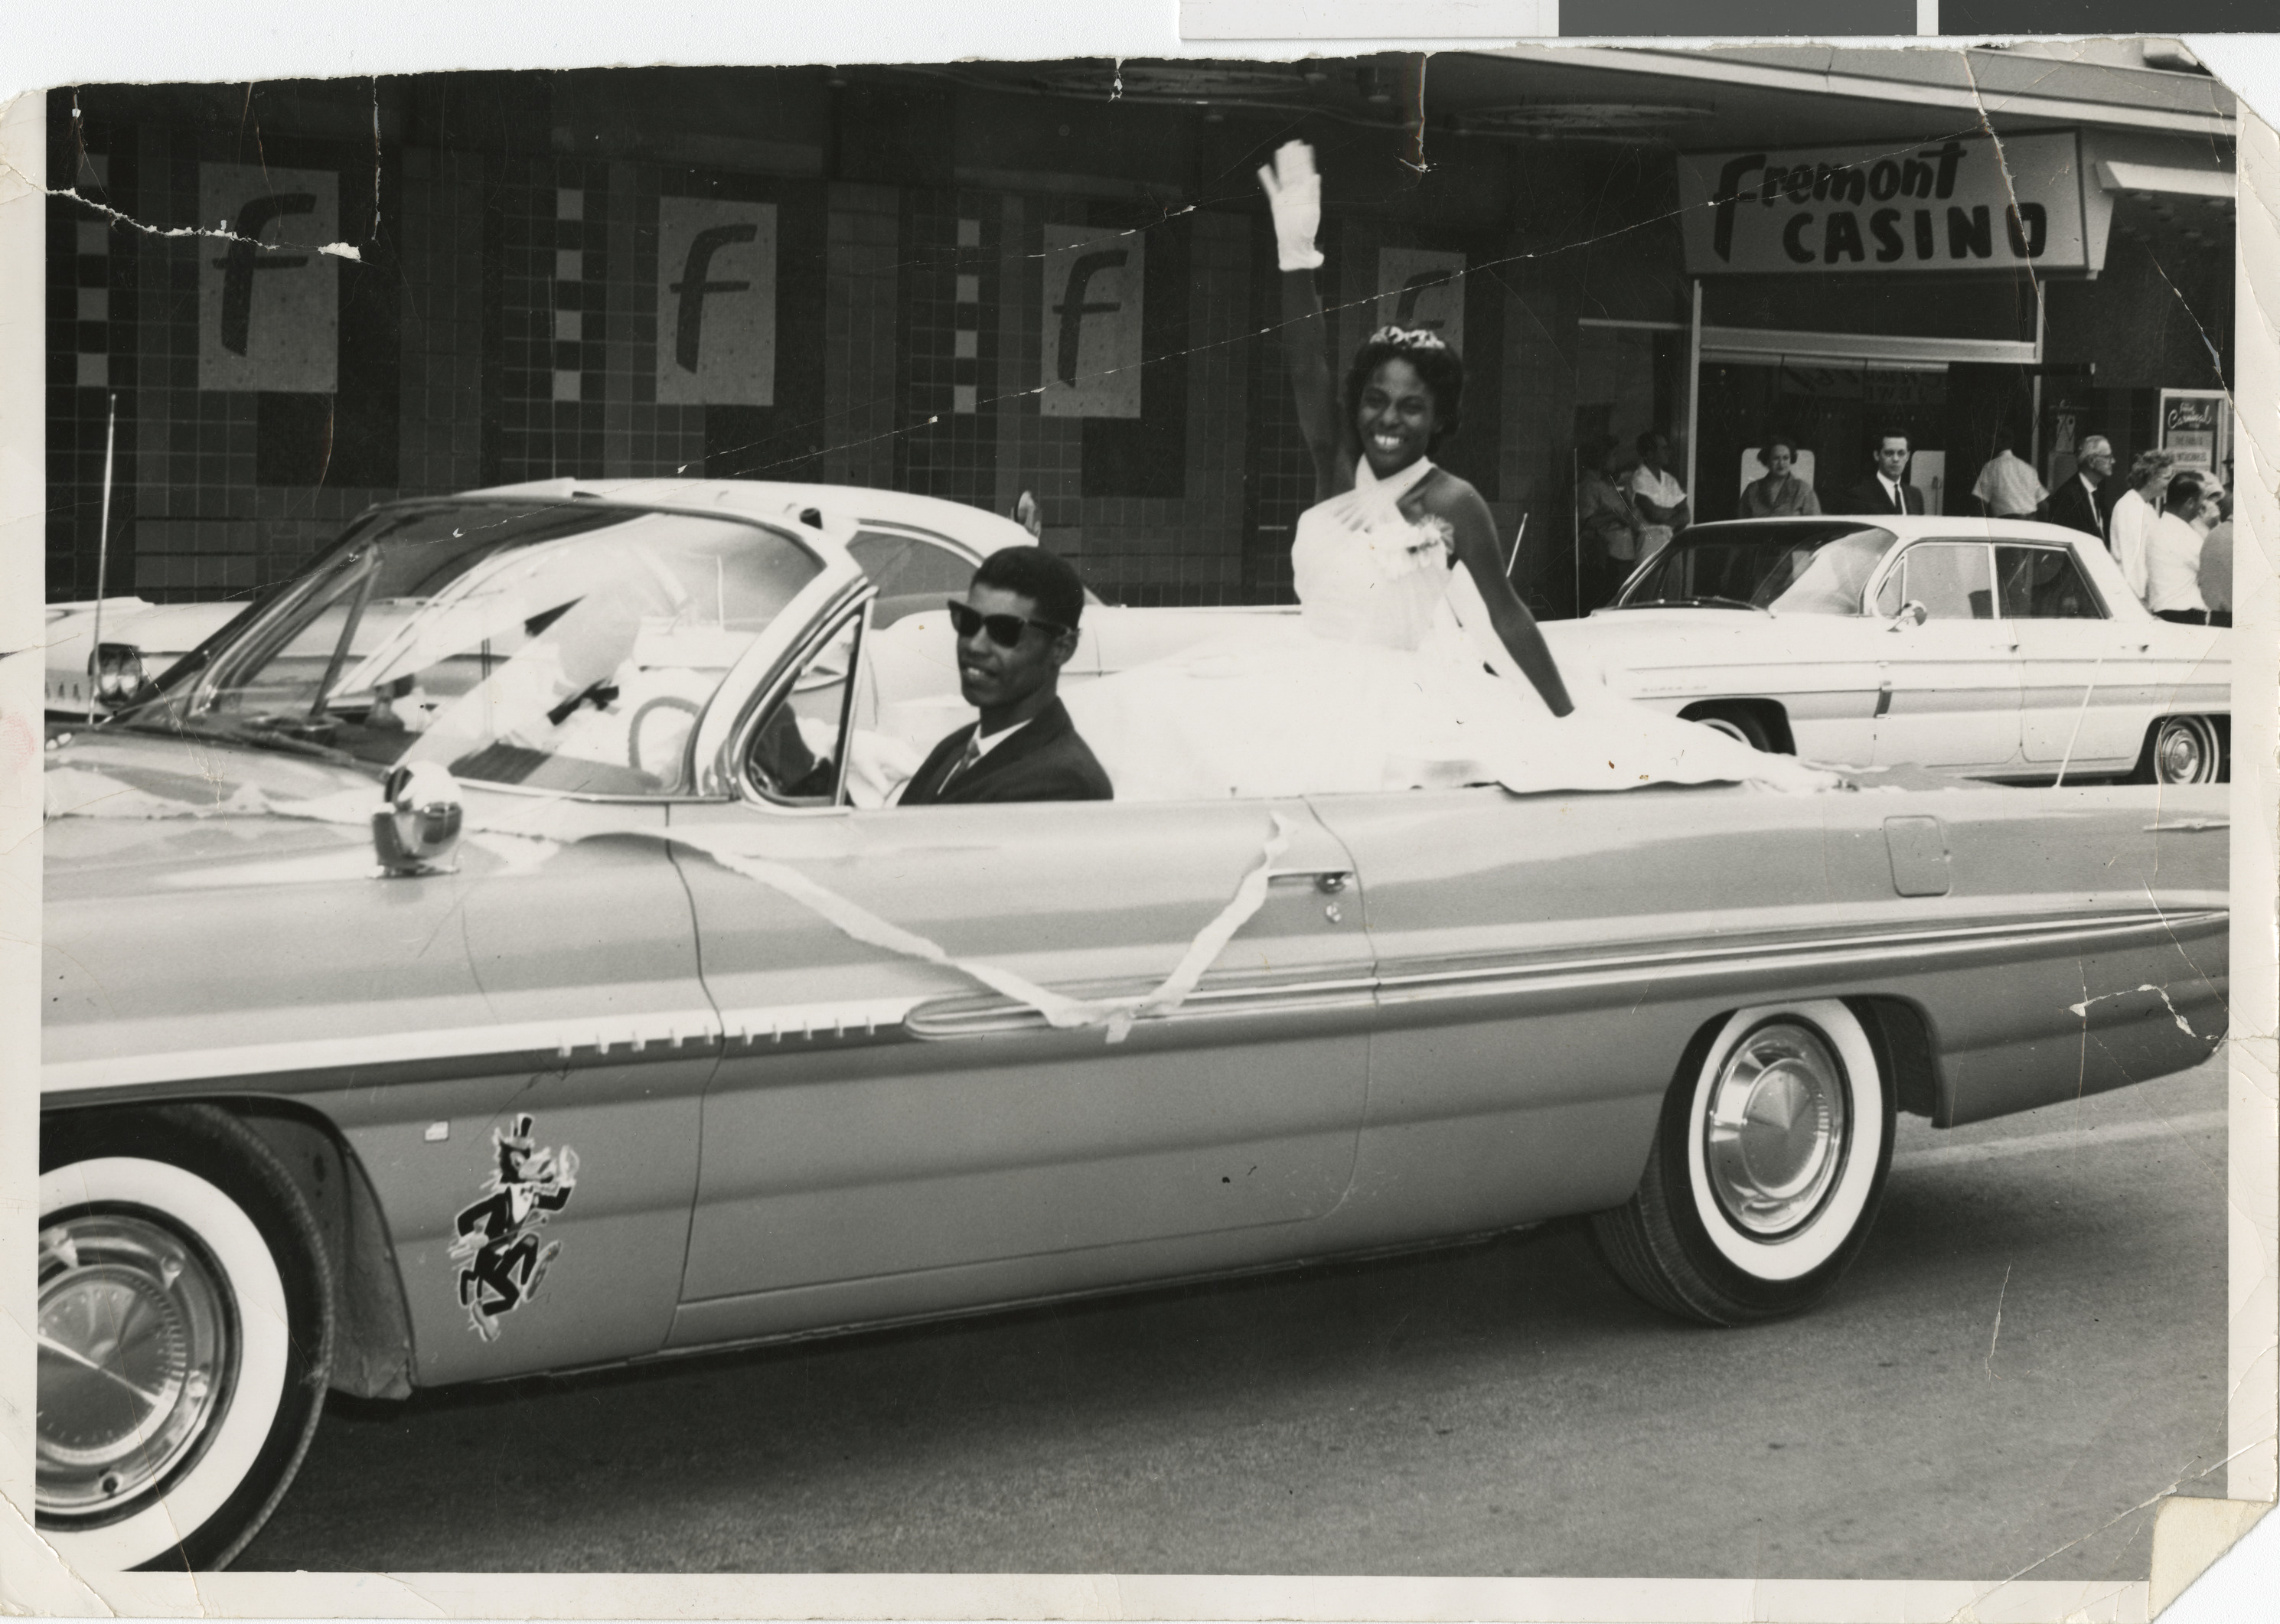 Black and white photograph of Ruby Amie-Pilot riding in the back of a convertible as the International Queen of the Sphinx in front of the Fremont Casino, no date